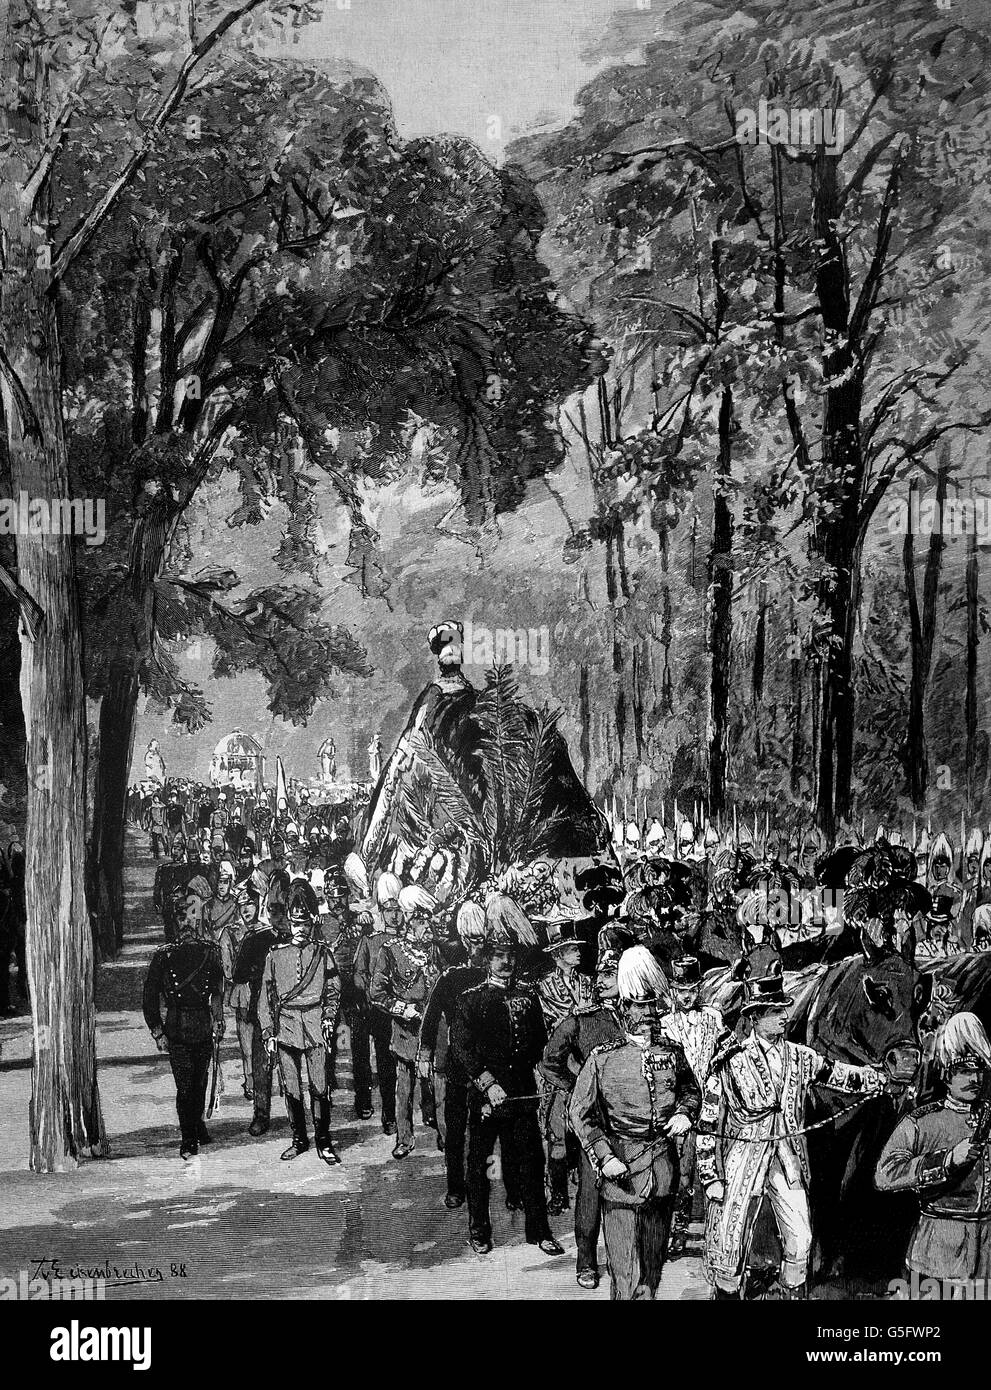 Friedrich III, 18.10.1831 - 15.6.1888, German Emperor 9.3.1888 - 15.6.1888, death, funeral procession in the main avenue of Sanssouci, 18.6.1888, contemporary wood engraving after drawing by Eckenbrecher, Stock Photo